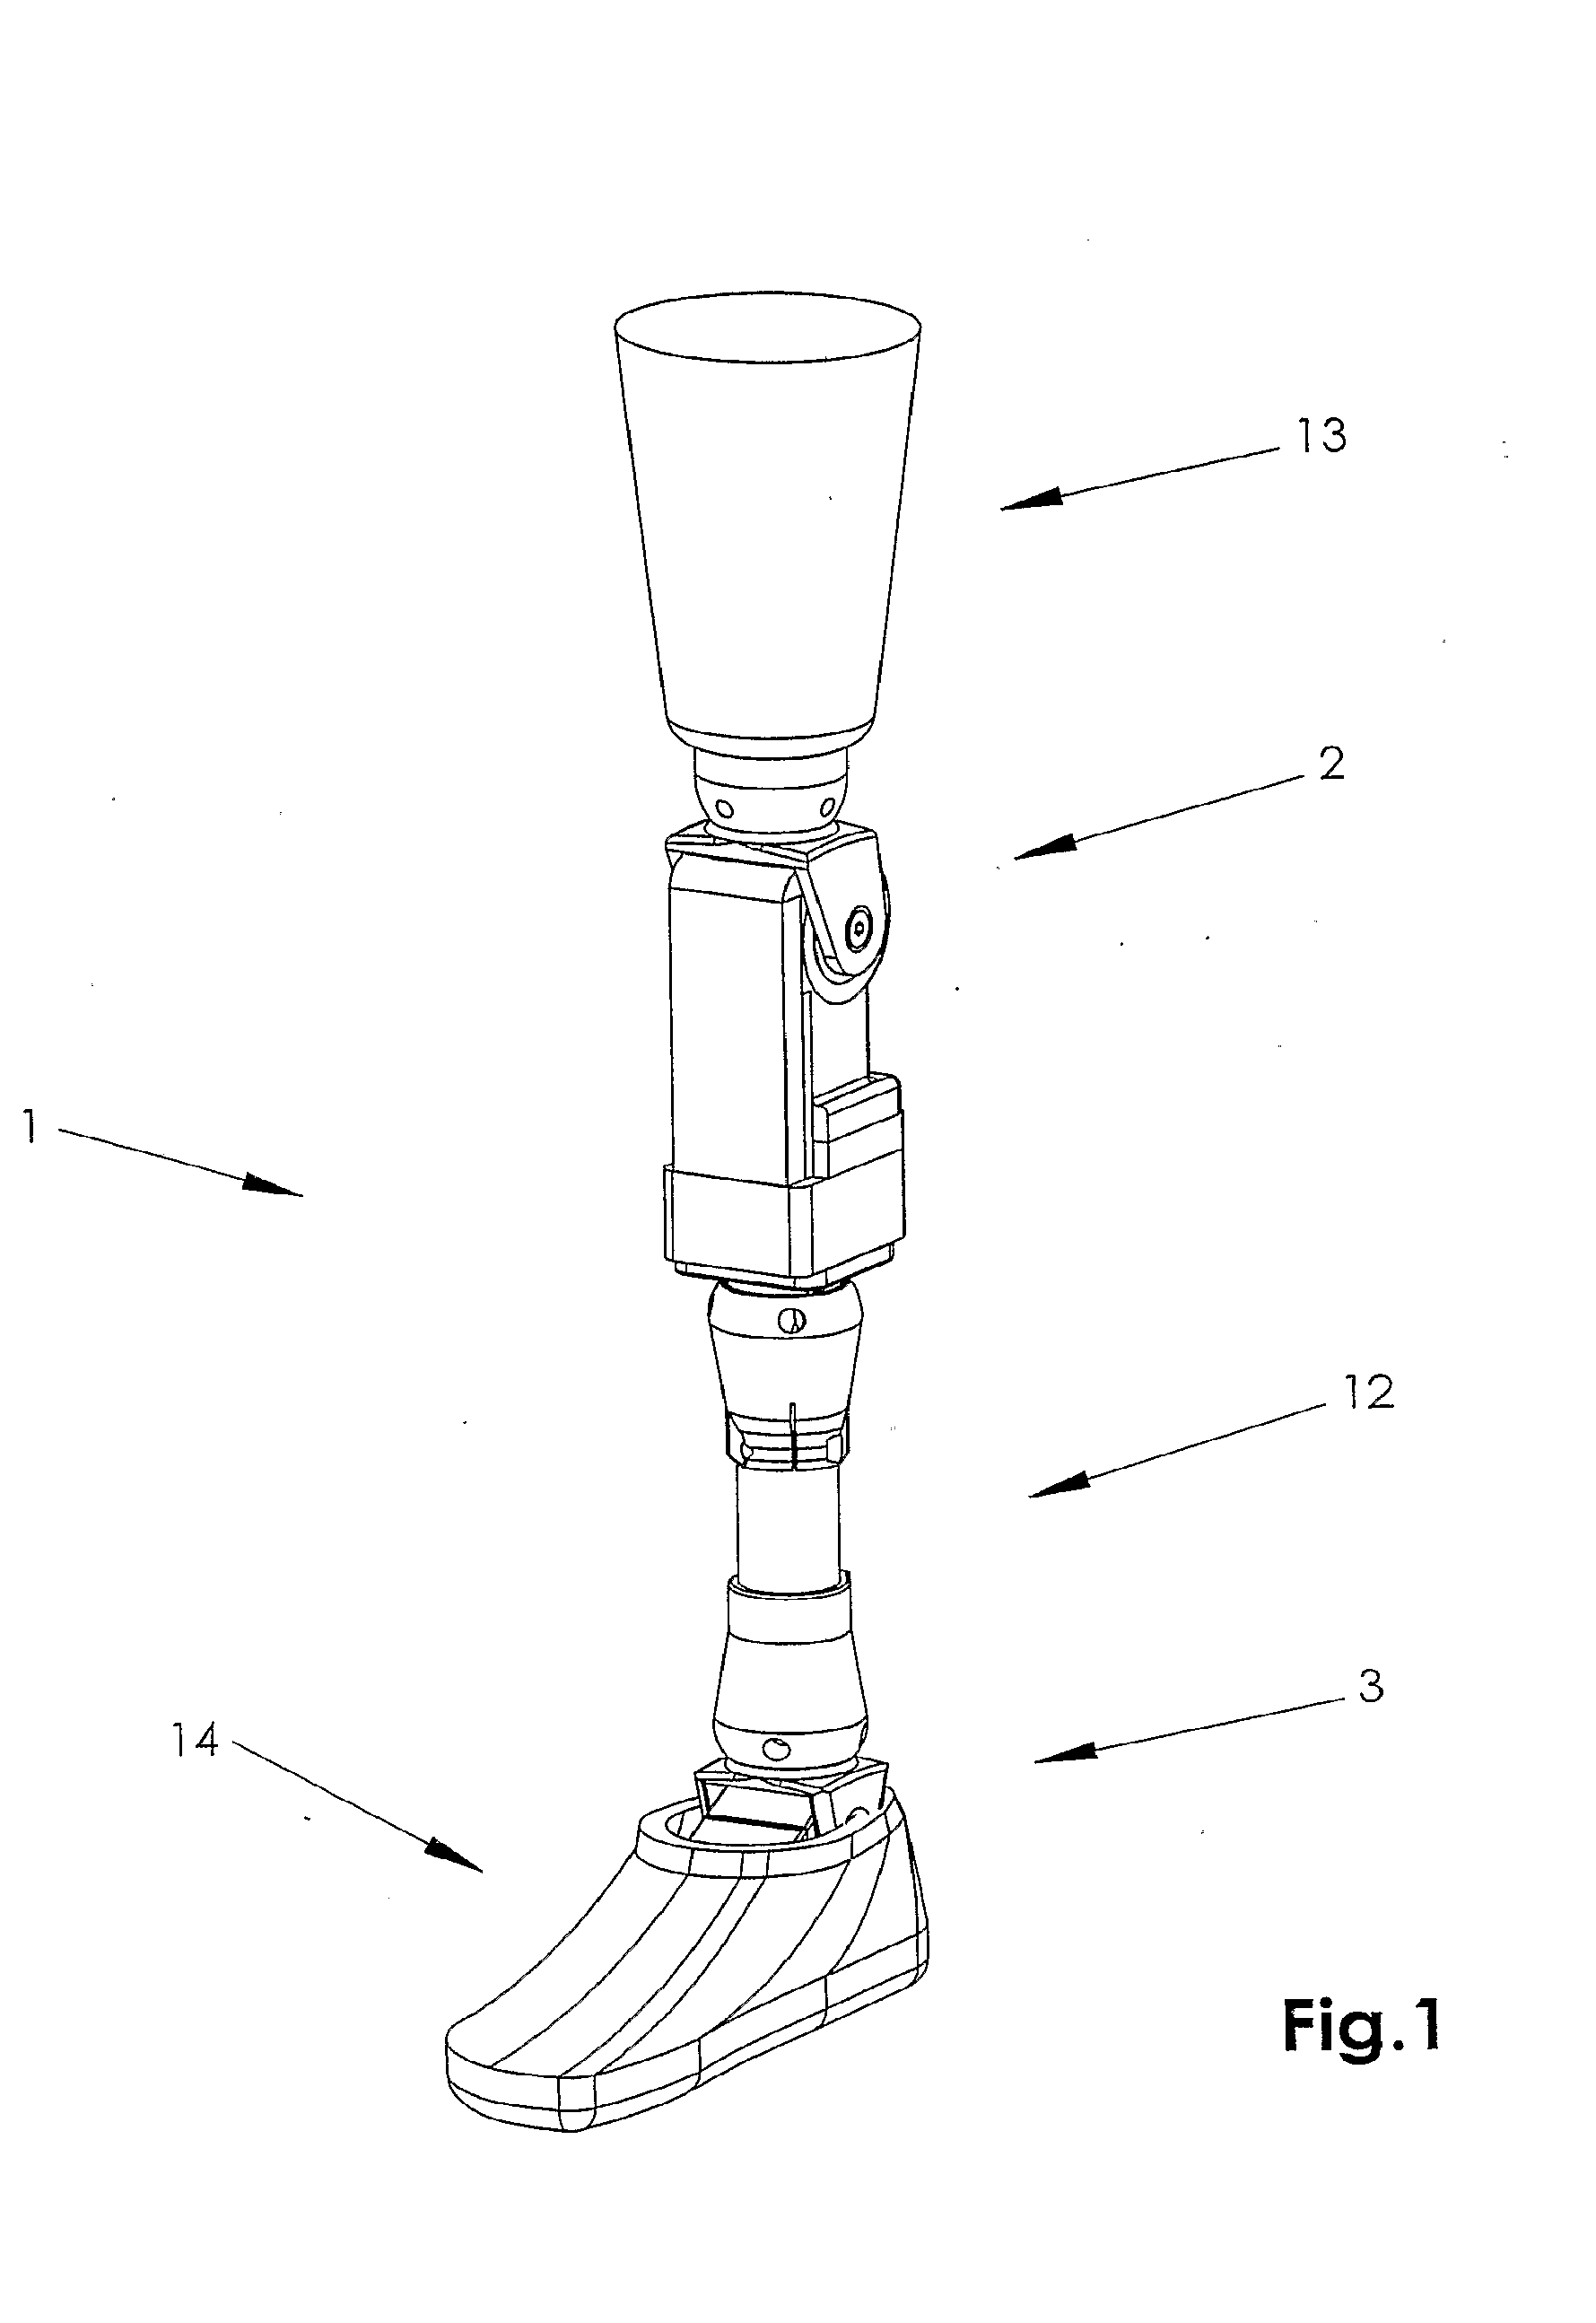 Combined active and passive leg prosthesis system and a method for performing a movement with such a system